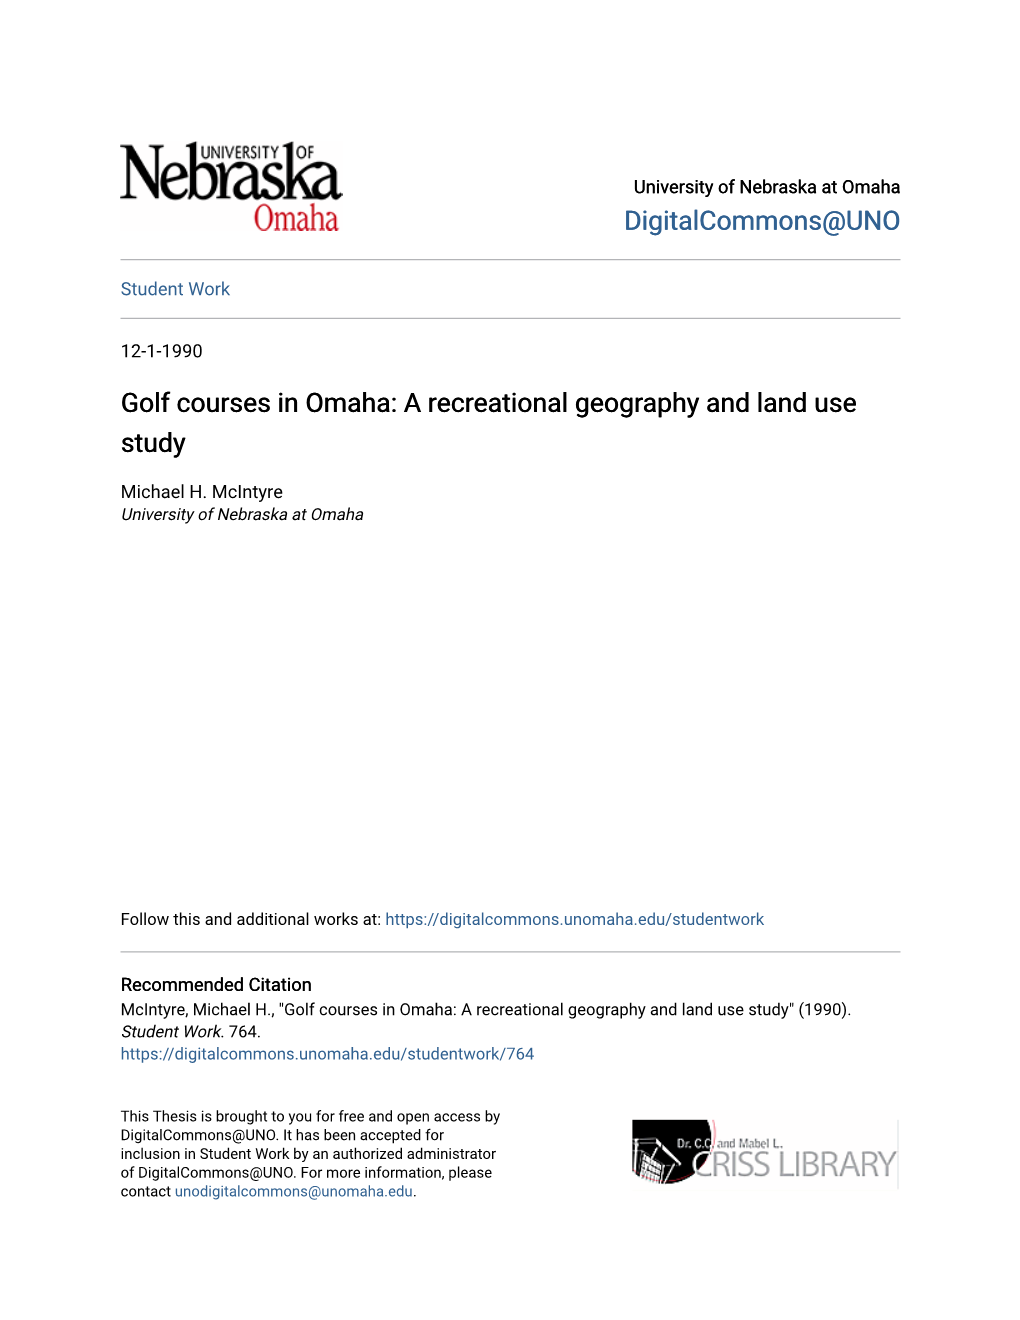 Golf Courses in Omaha: a Recreational Geography and Land Use Study